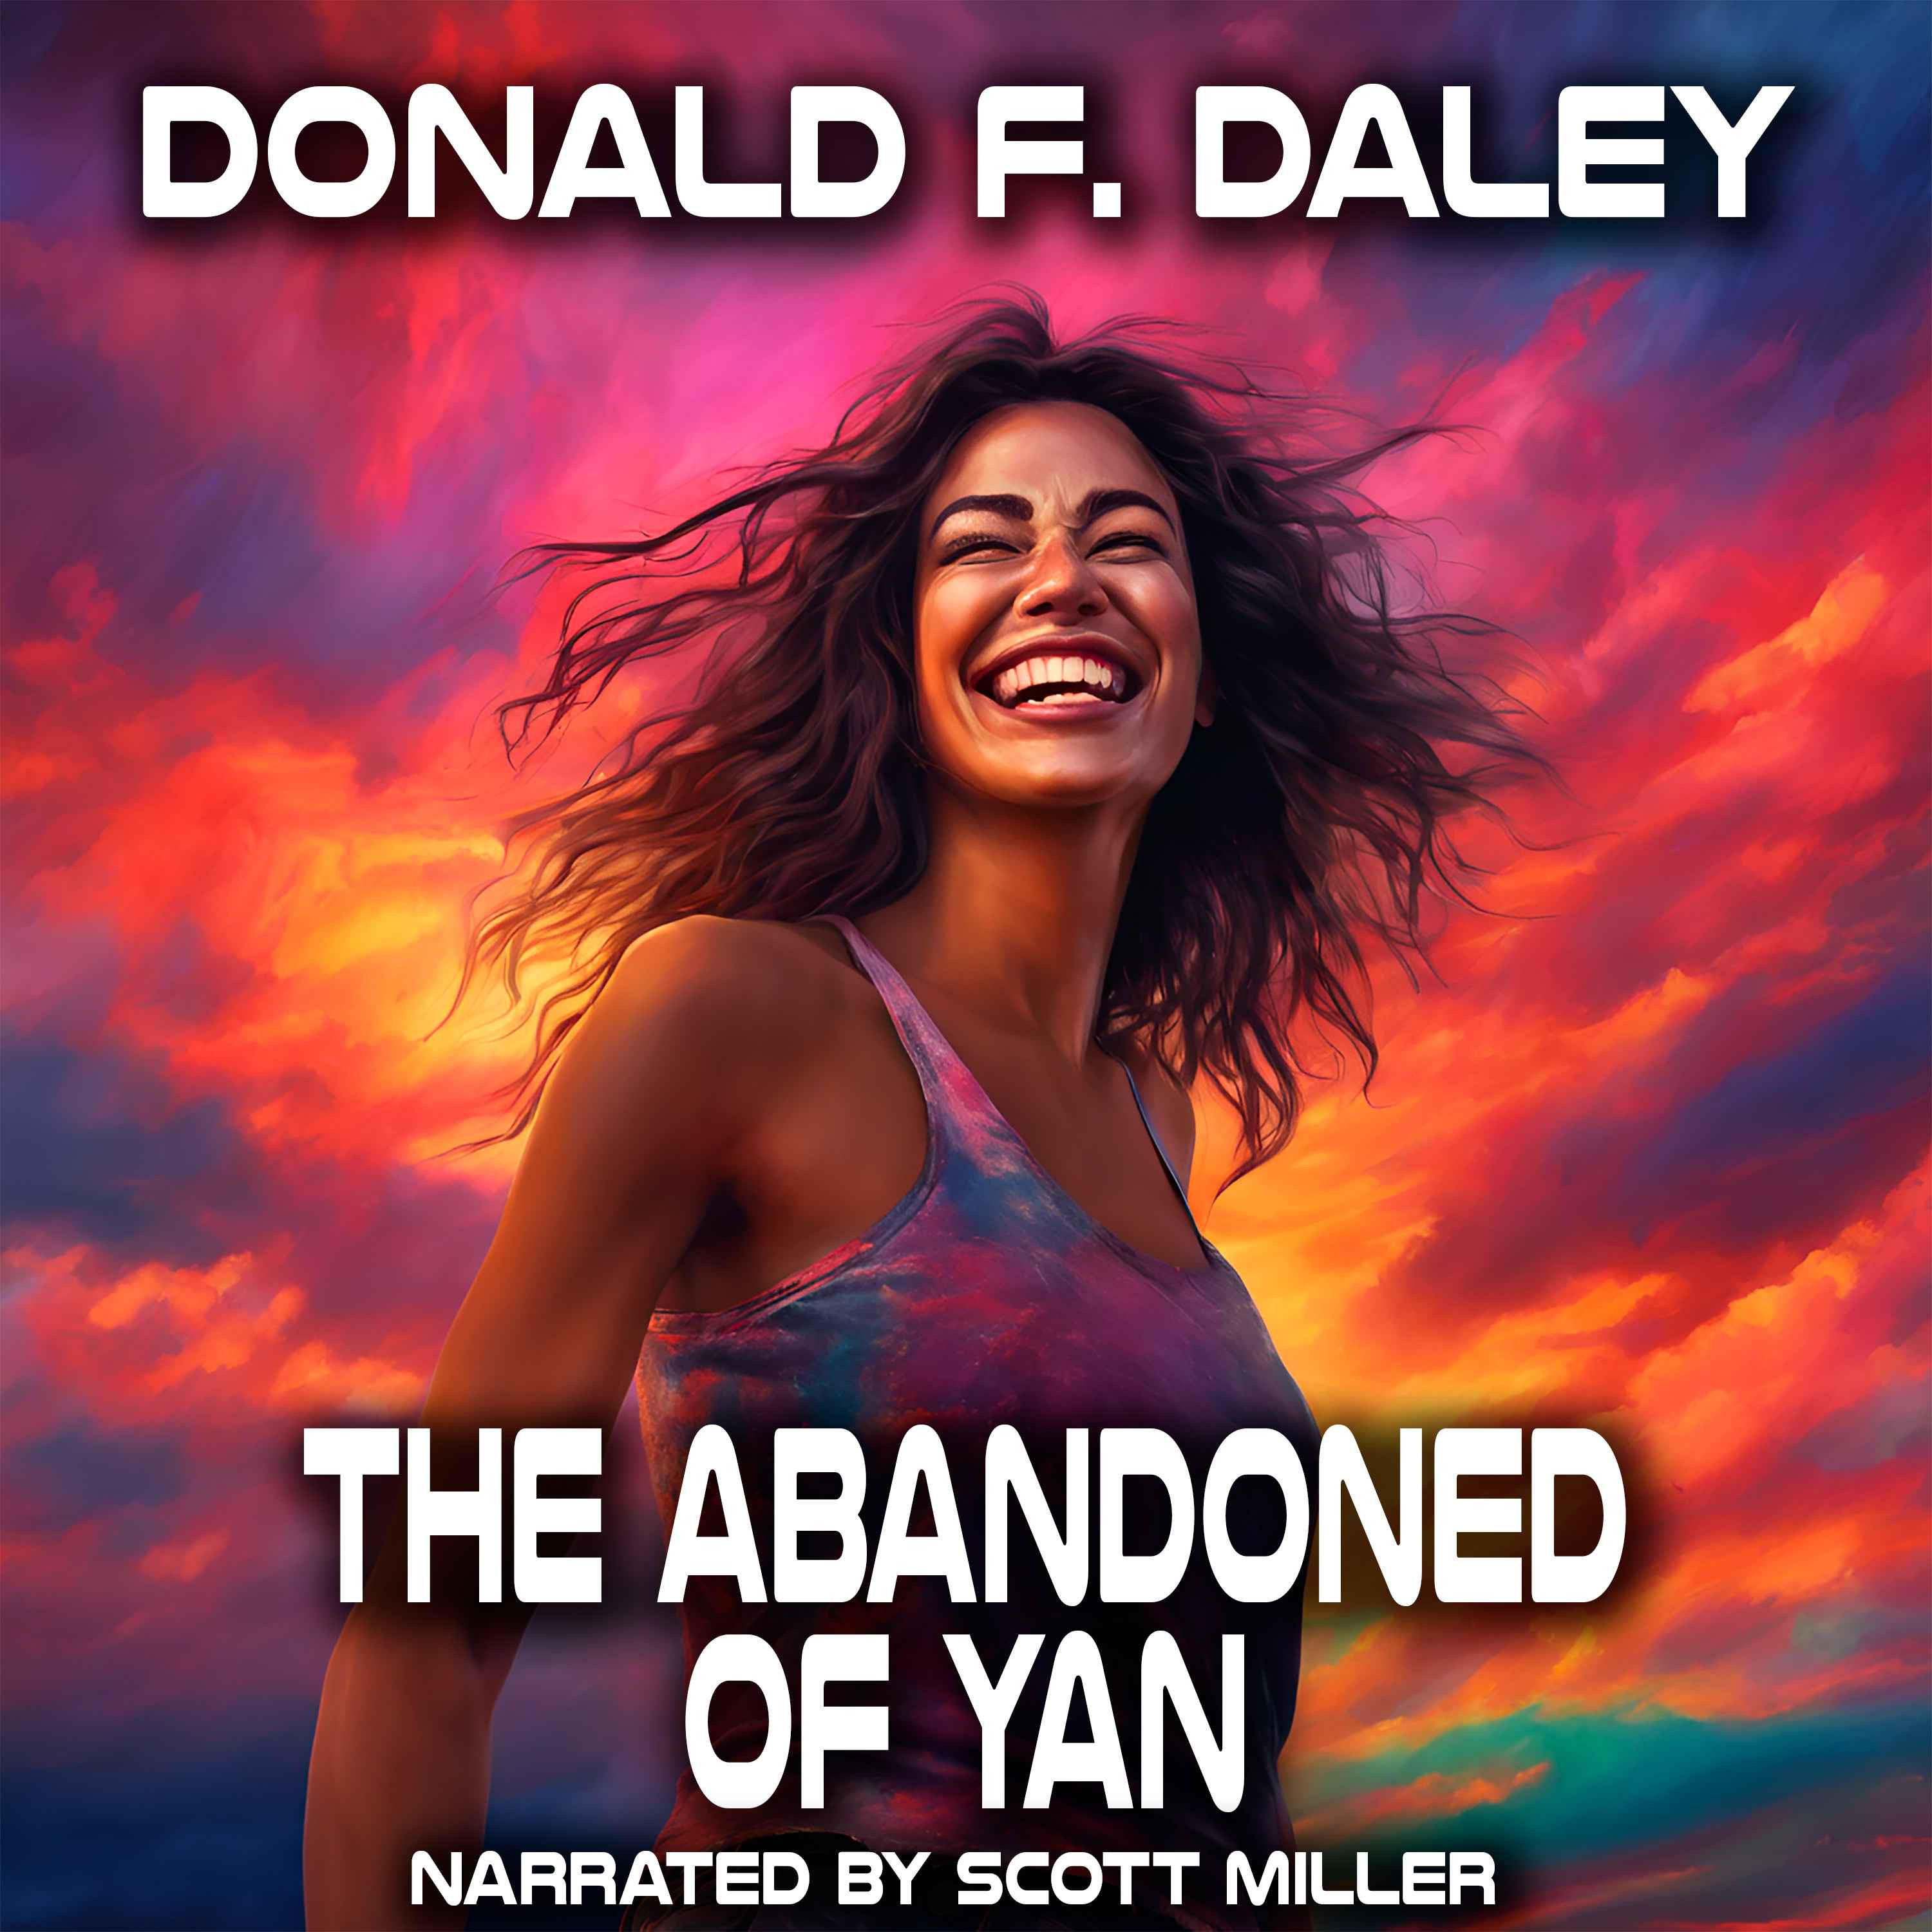 The Abandoned of Yan by Donald F. Daley - Short Science Fiction Story From the 1960s